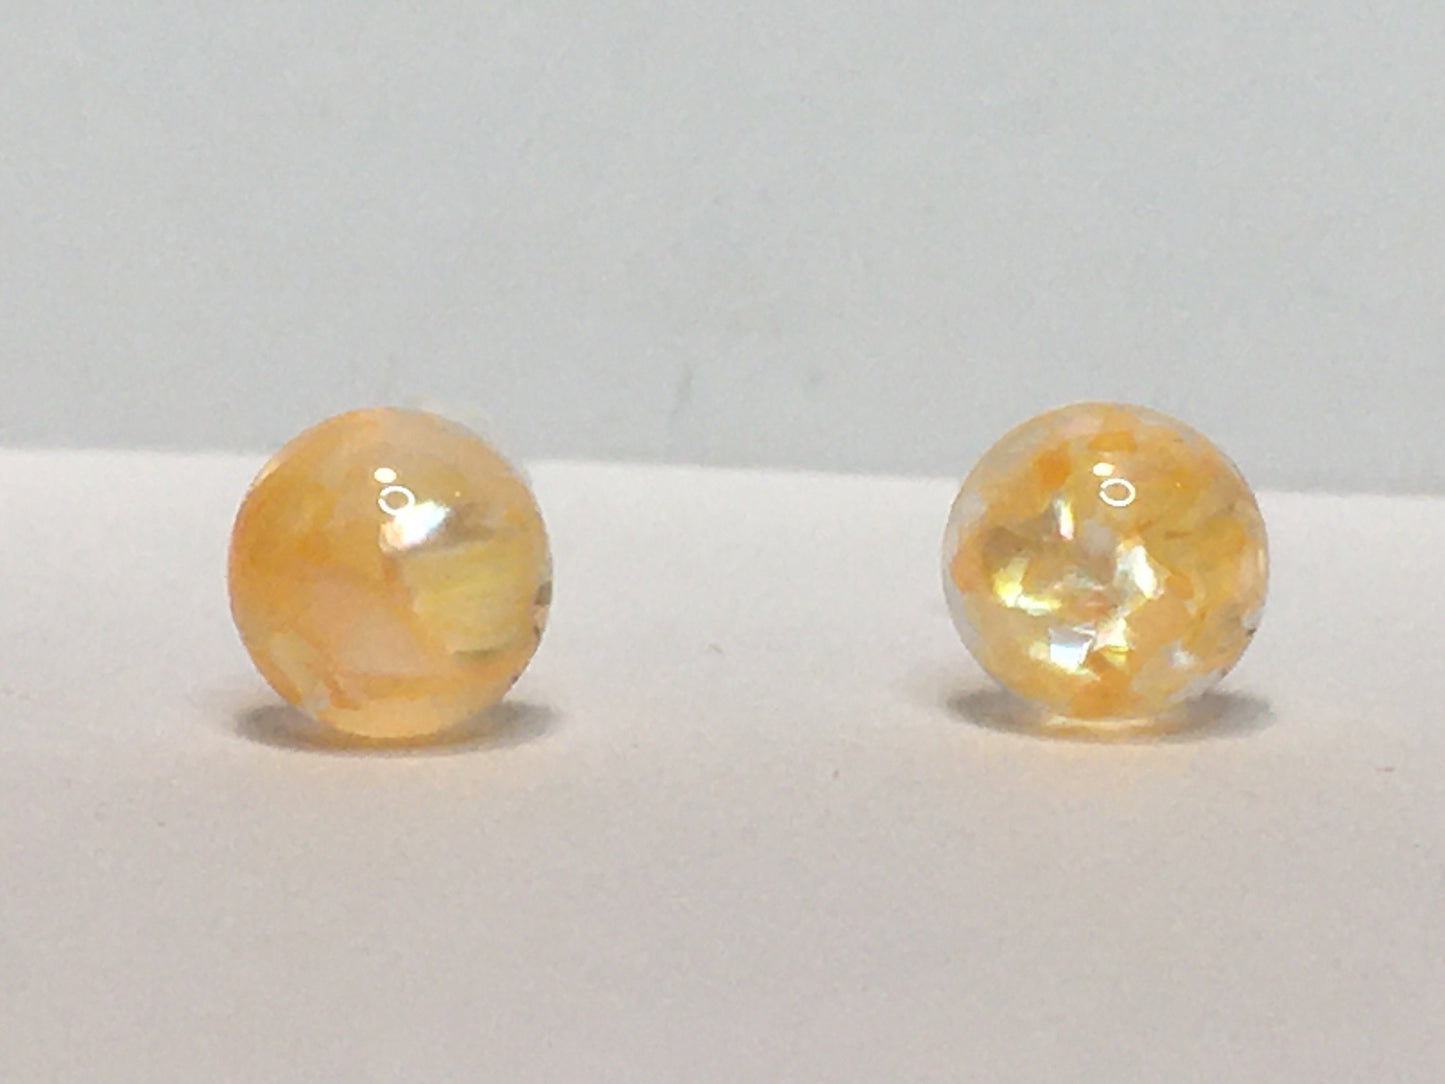 Resin Earrings 1/4", filled with peach dyed crushed seashells